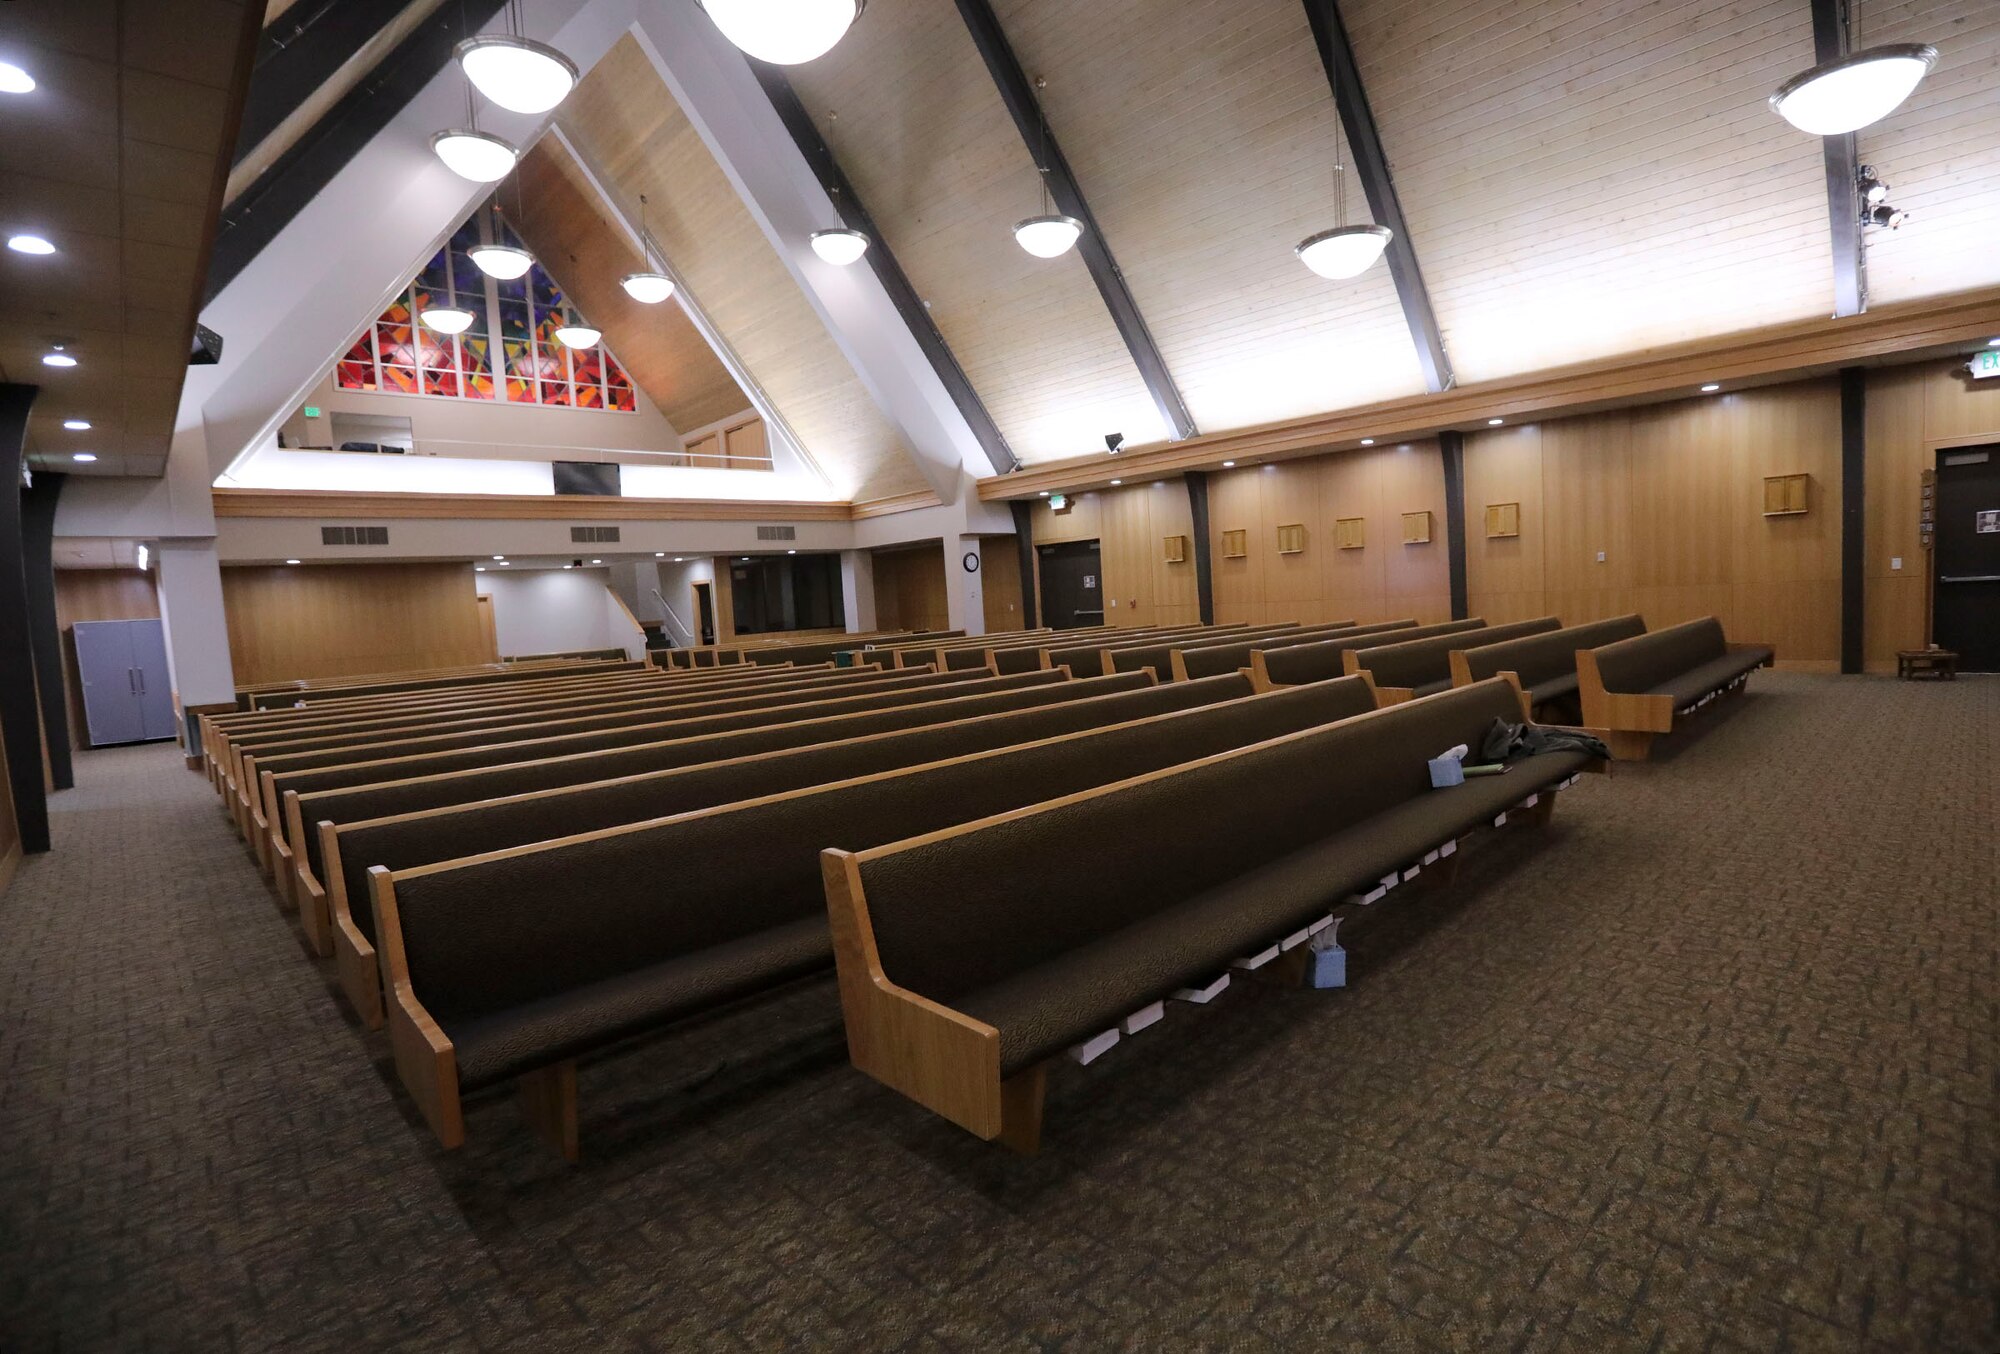 The sanctuary, which serves multiple faiths at Hill Air Force Base, is pictured.